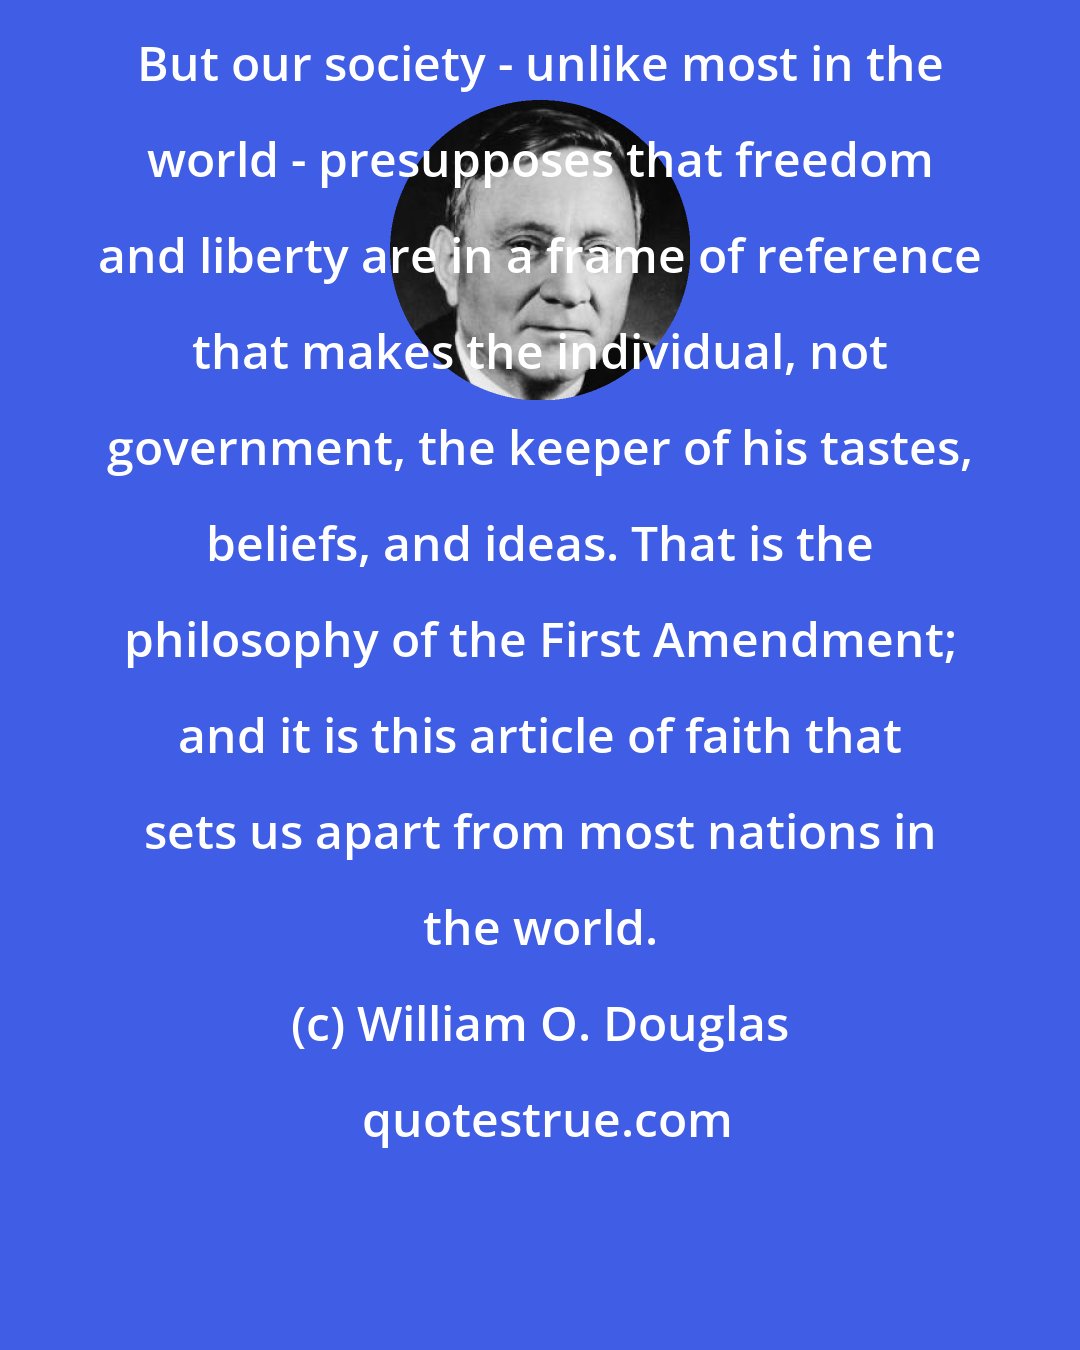 William O. Douglas: But our society - unlike most in the world - presupposes that freedom and liberty are in a frame of reference that makes the individual, not government, the keeper of his tastes, beliefs, and ideas. That is the philosophy of the First Amendment; and it is this article of faith that sets us apart from most nations in the world.